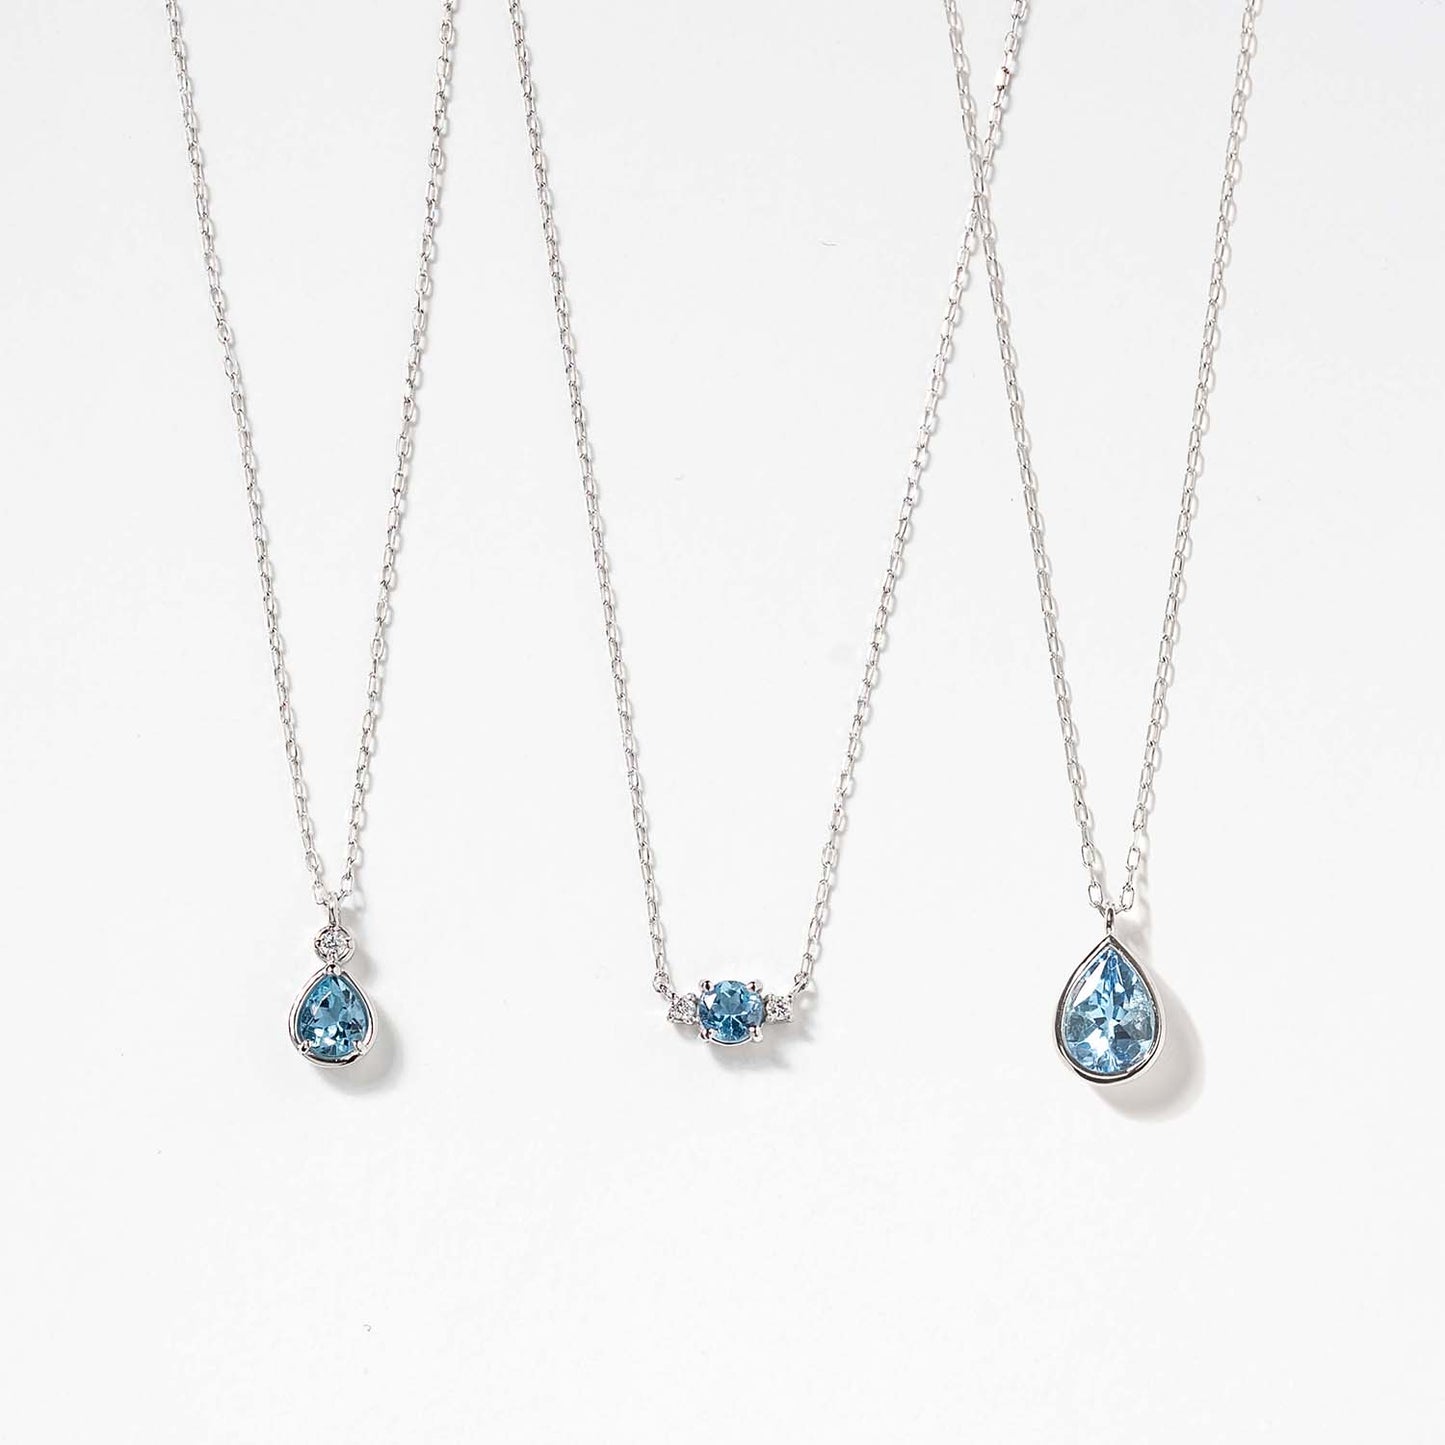 March Pisces BIRTHSTONE Aquamarine Crystal Earrings and Necklace Set With  Swarovski Crystals and Sterling Silver - Etsy